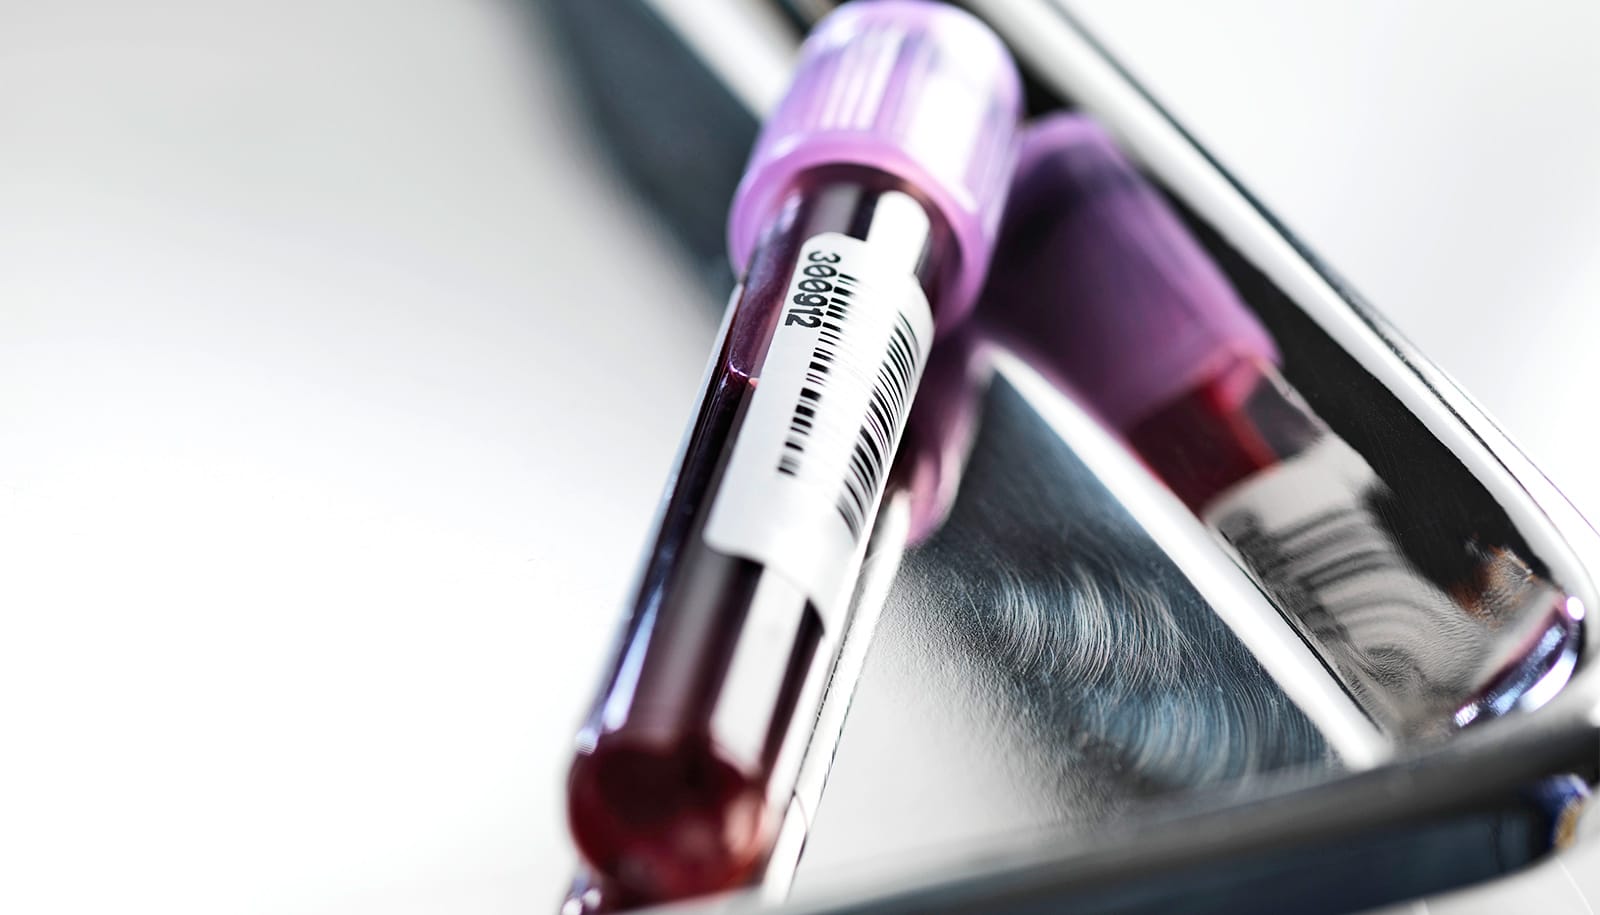 Race distorts  blood test results for Alzheimer’s disease